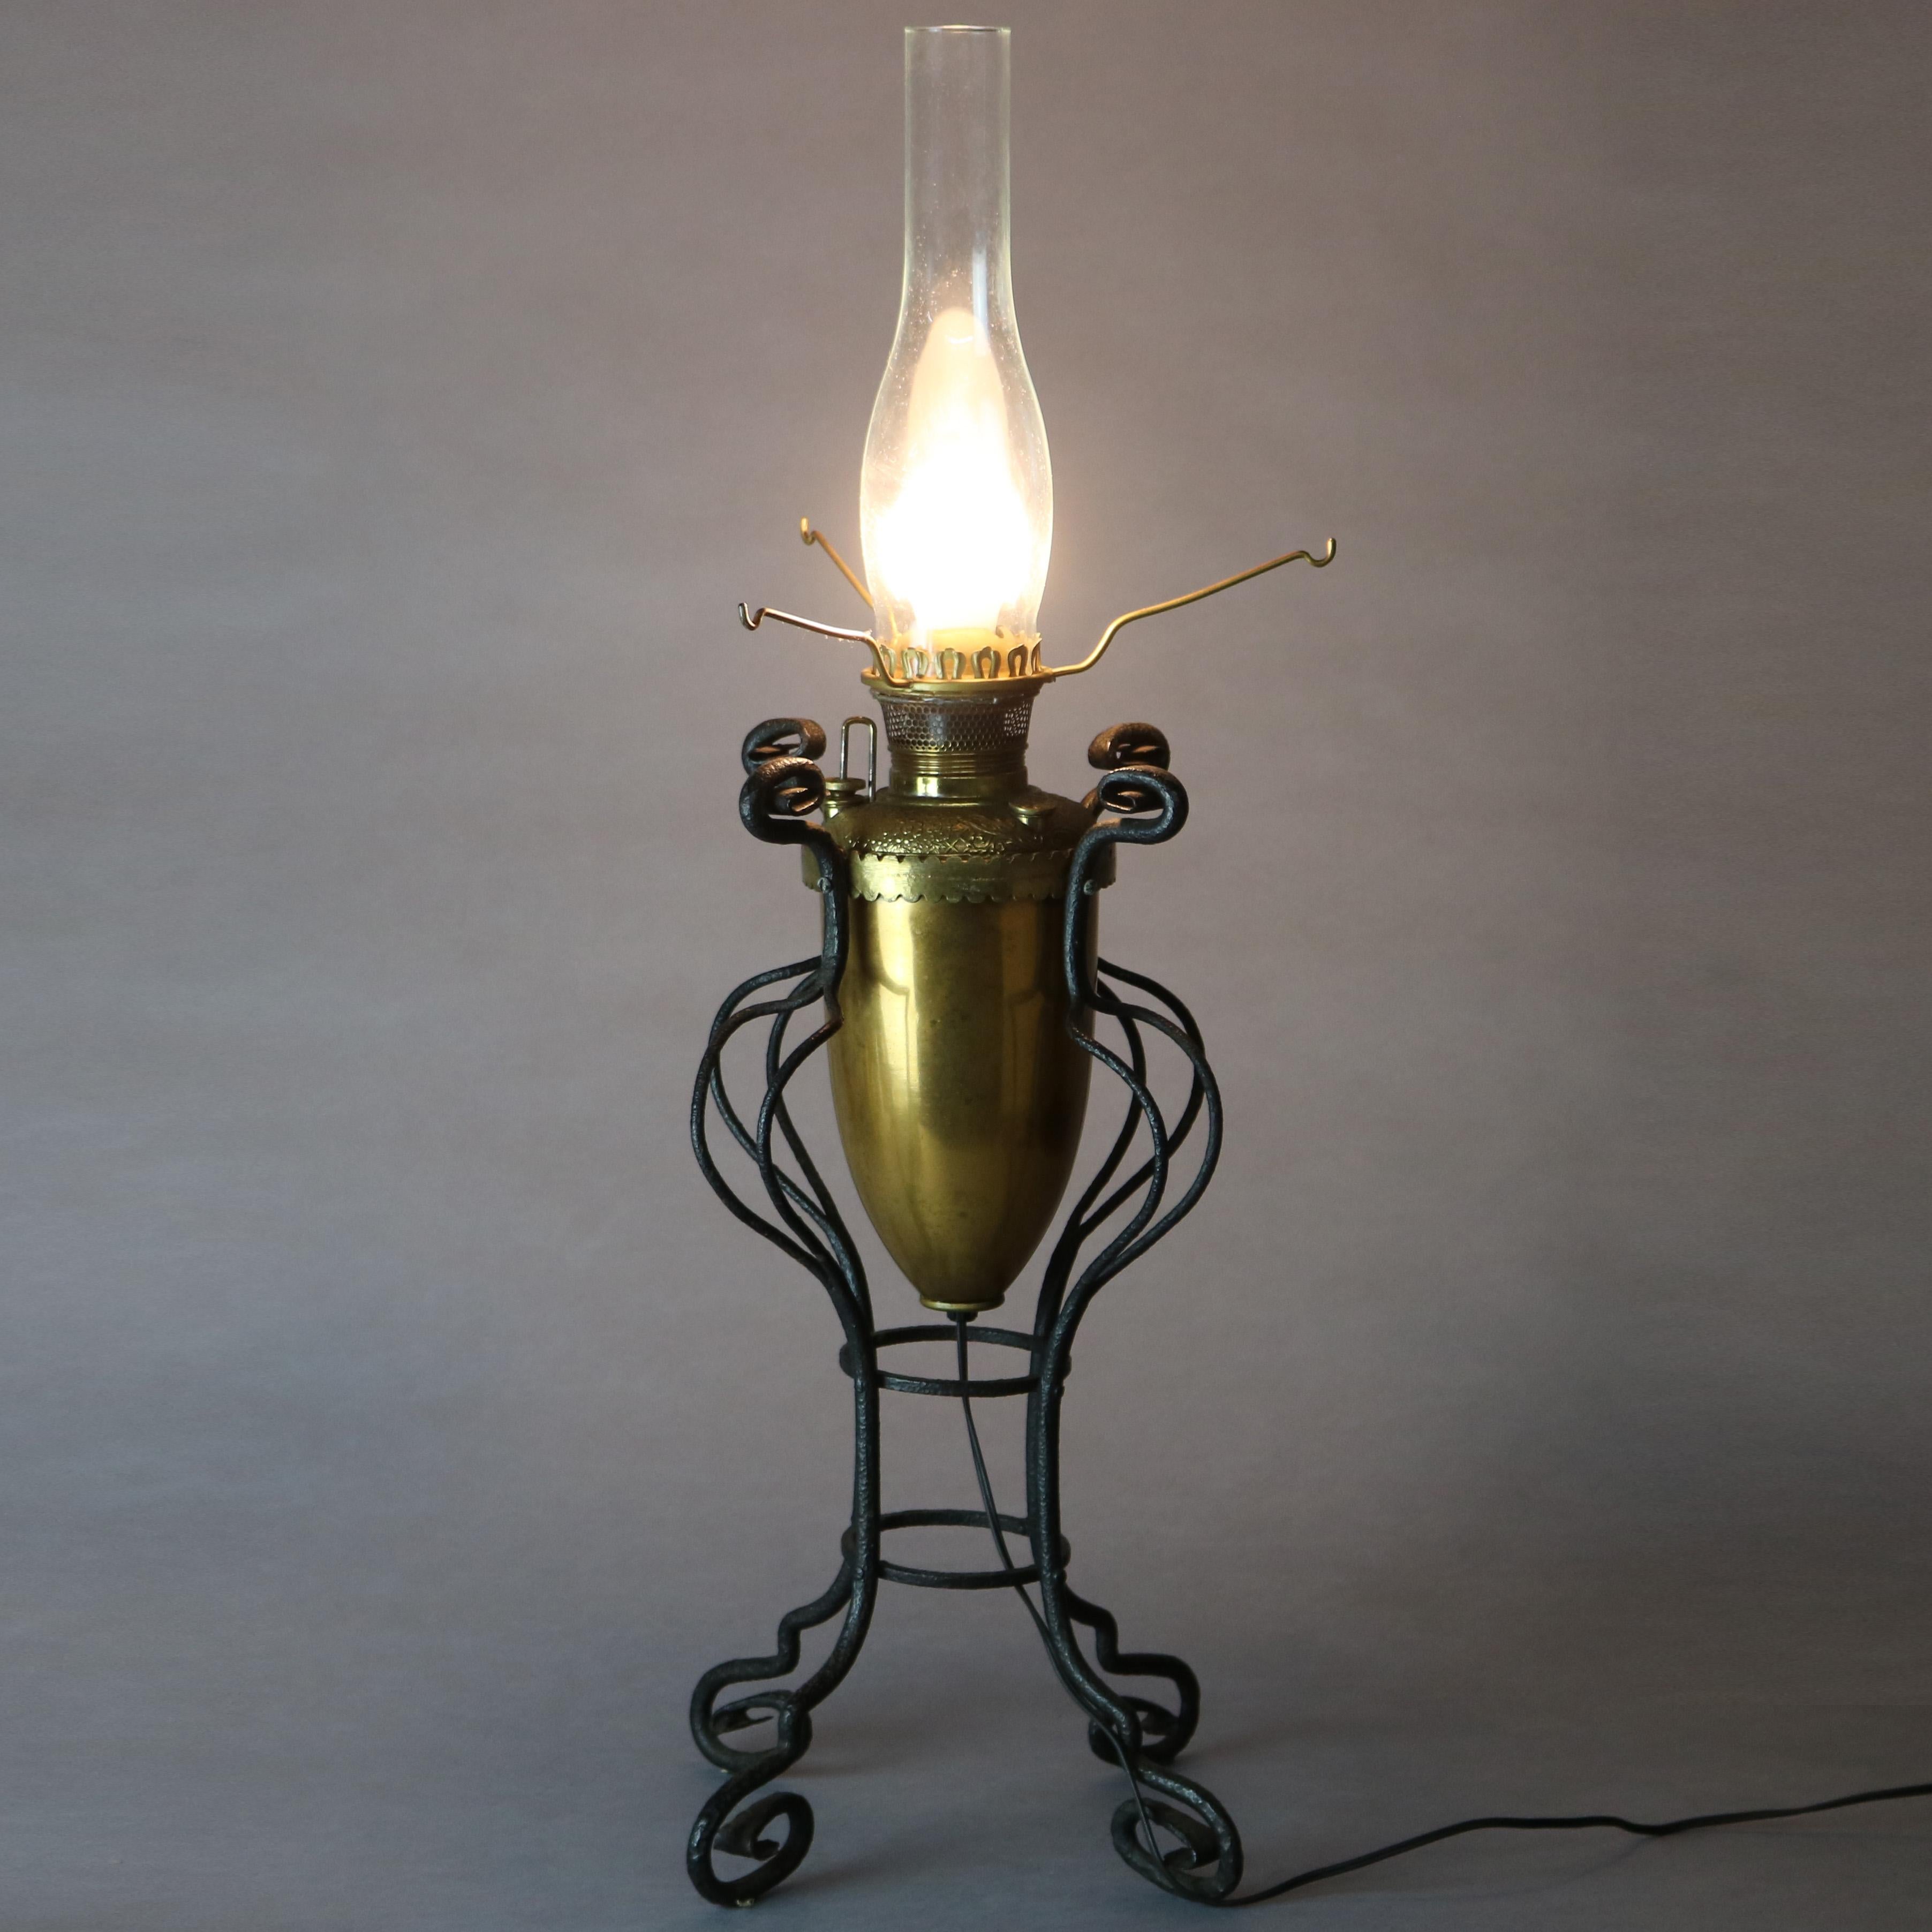 Antique Arts & Crafts Wrought Iron Table Lamp & Hand Painted Shade, circa 1910 For Sale 2